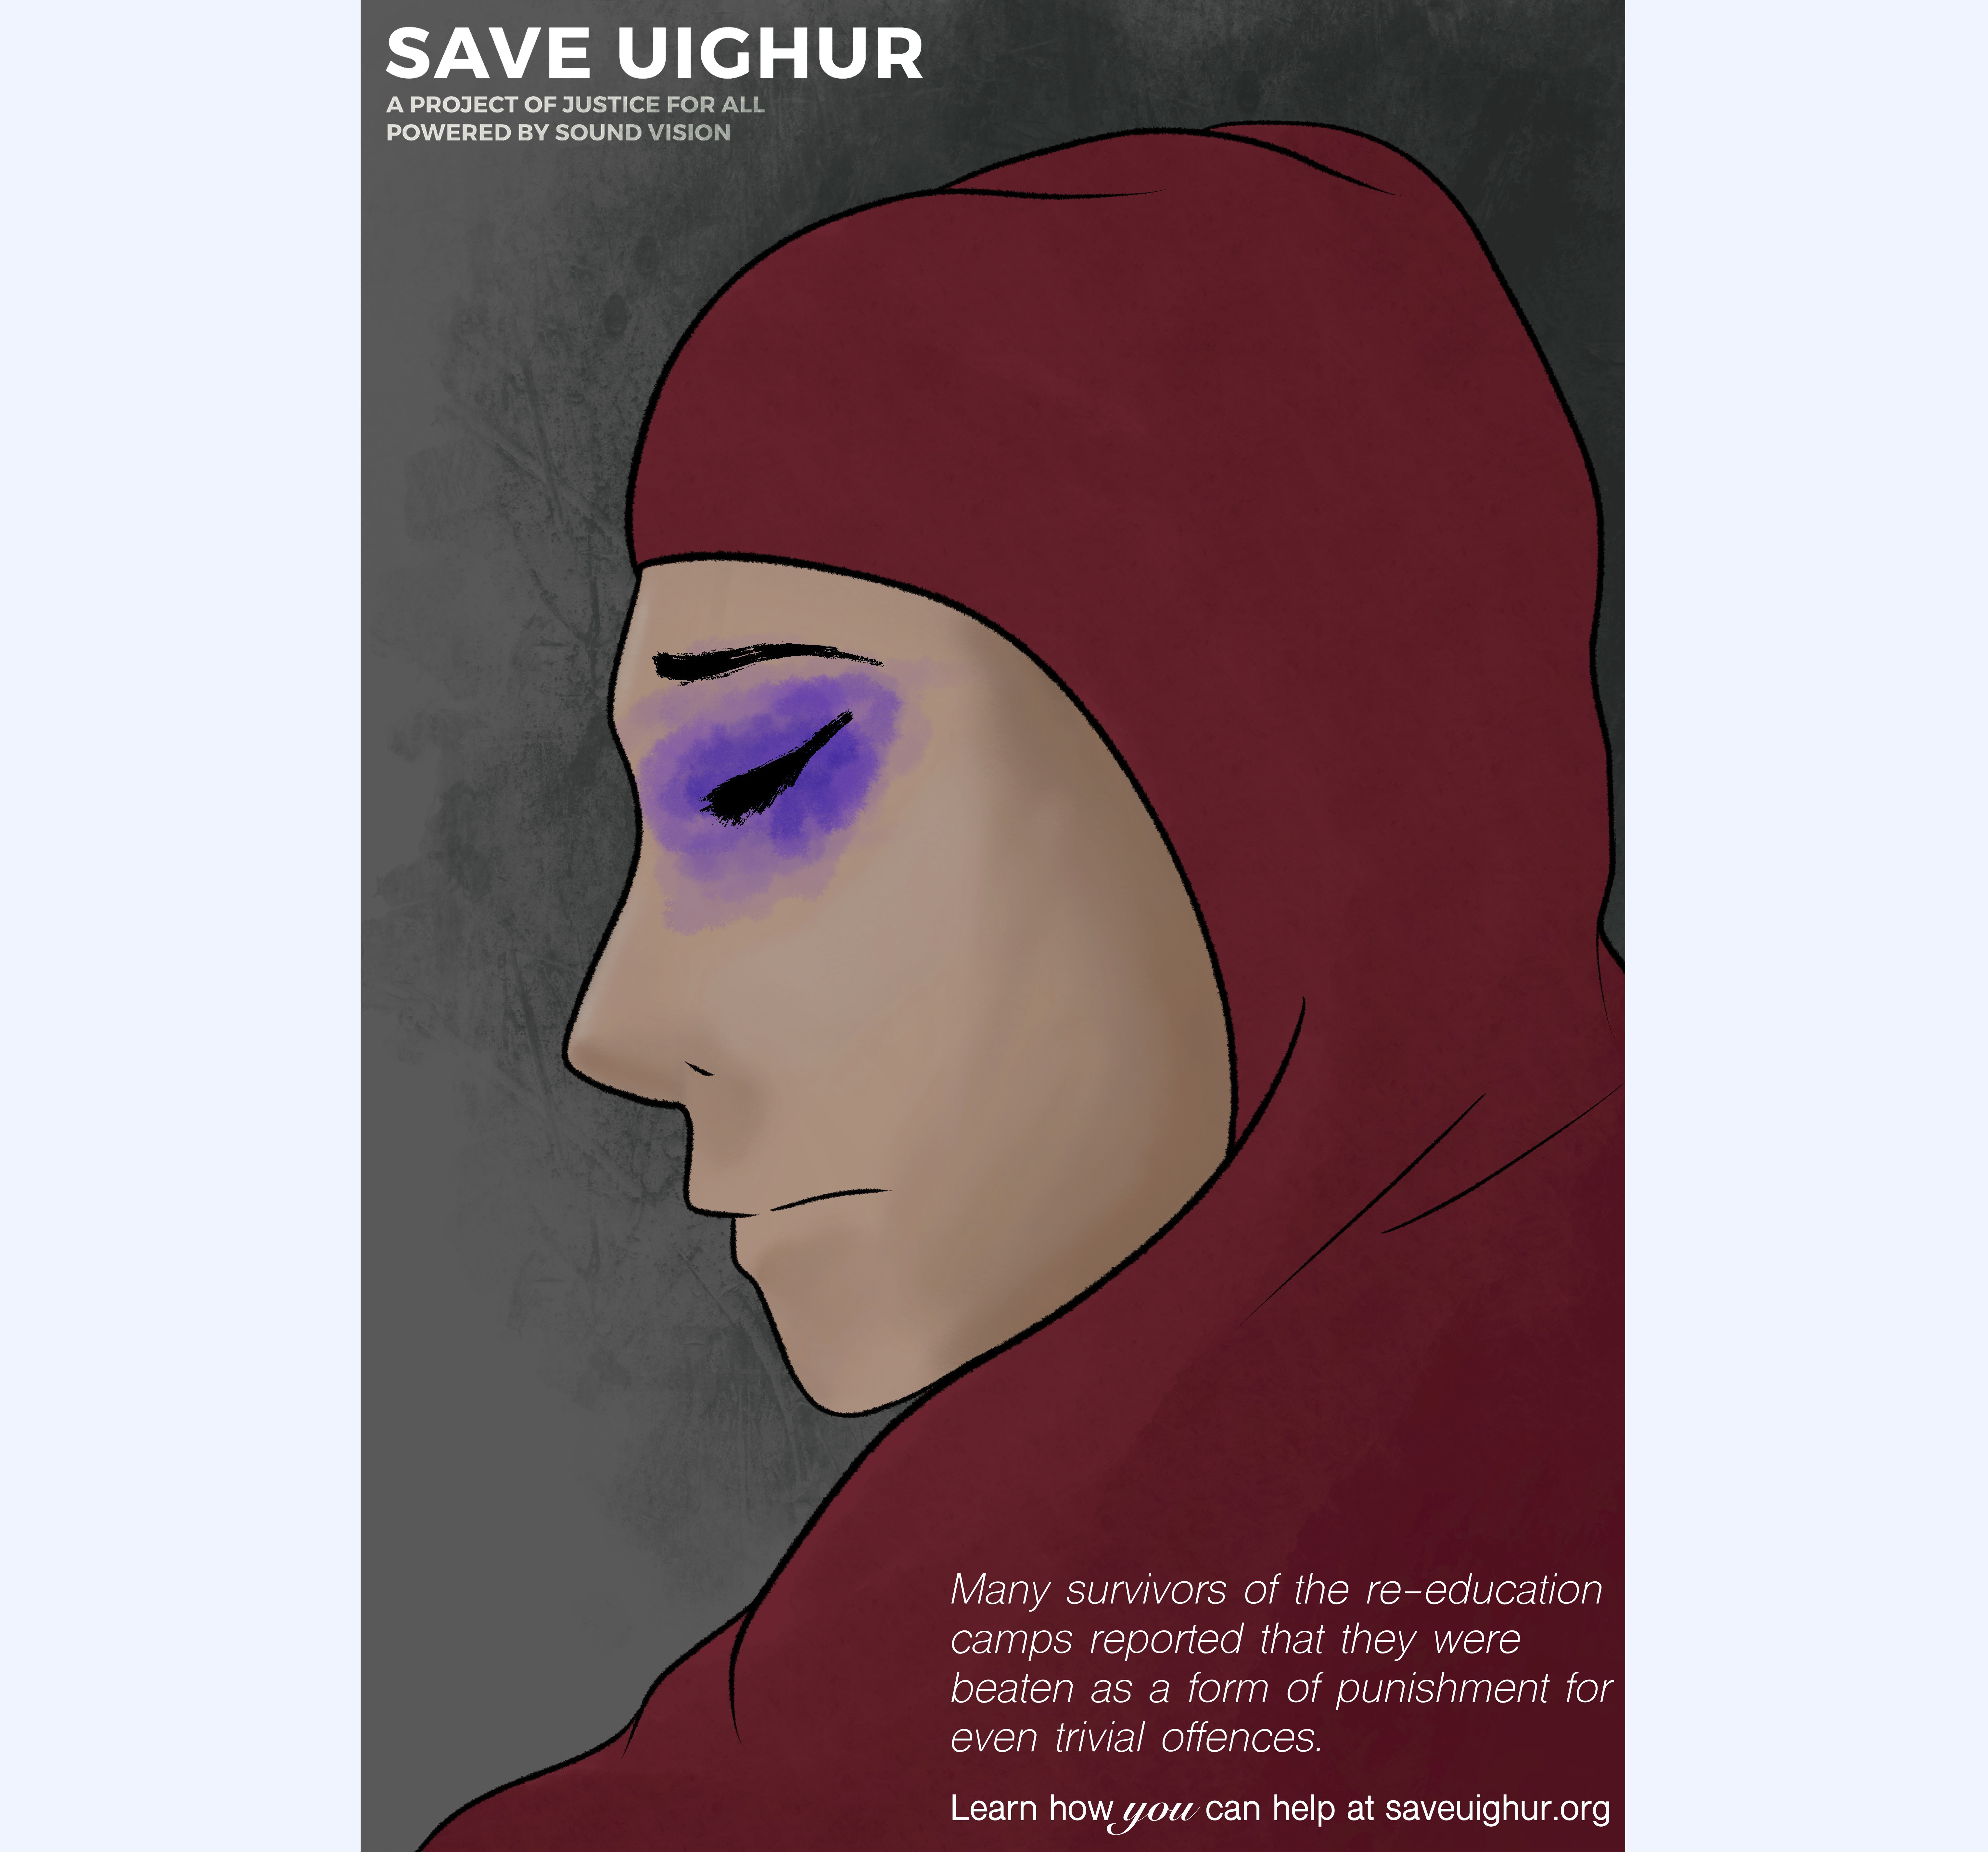 Digitally drawn poster for the Save Uighur project